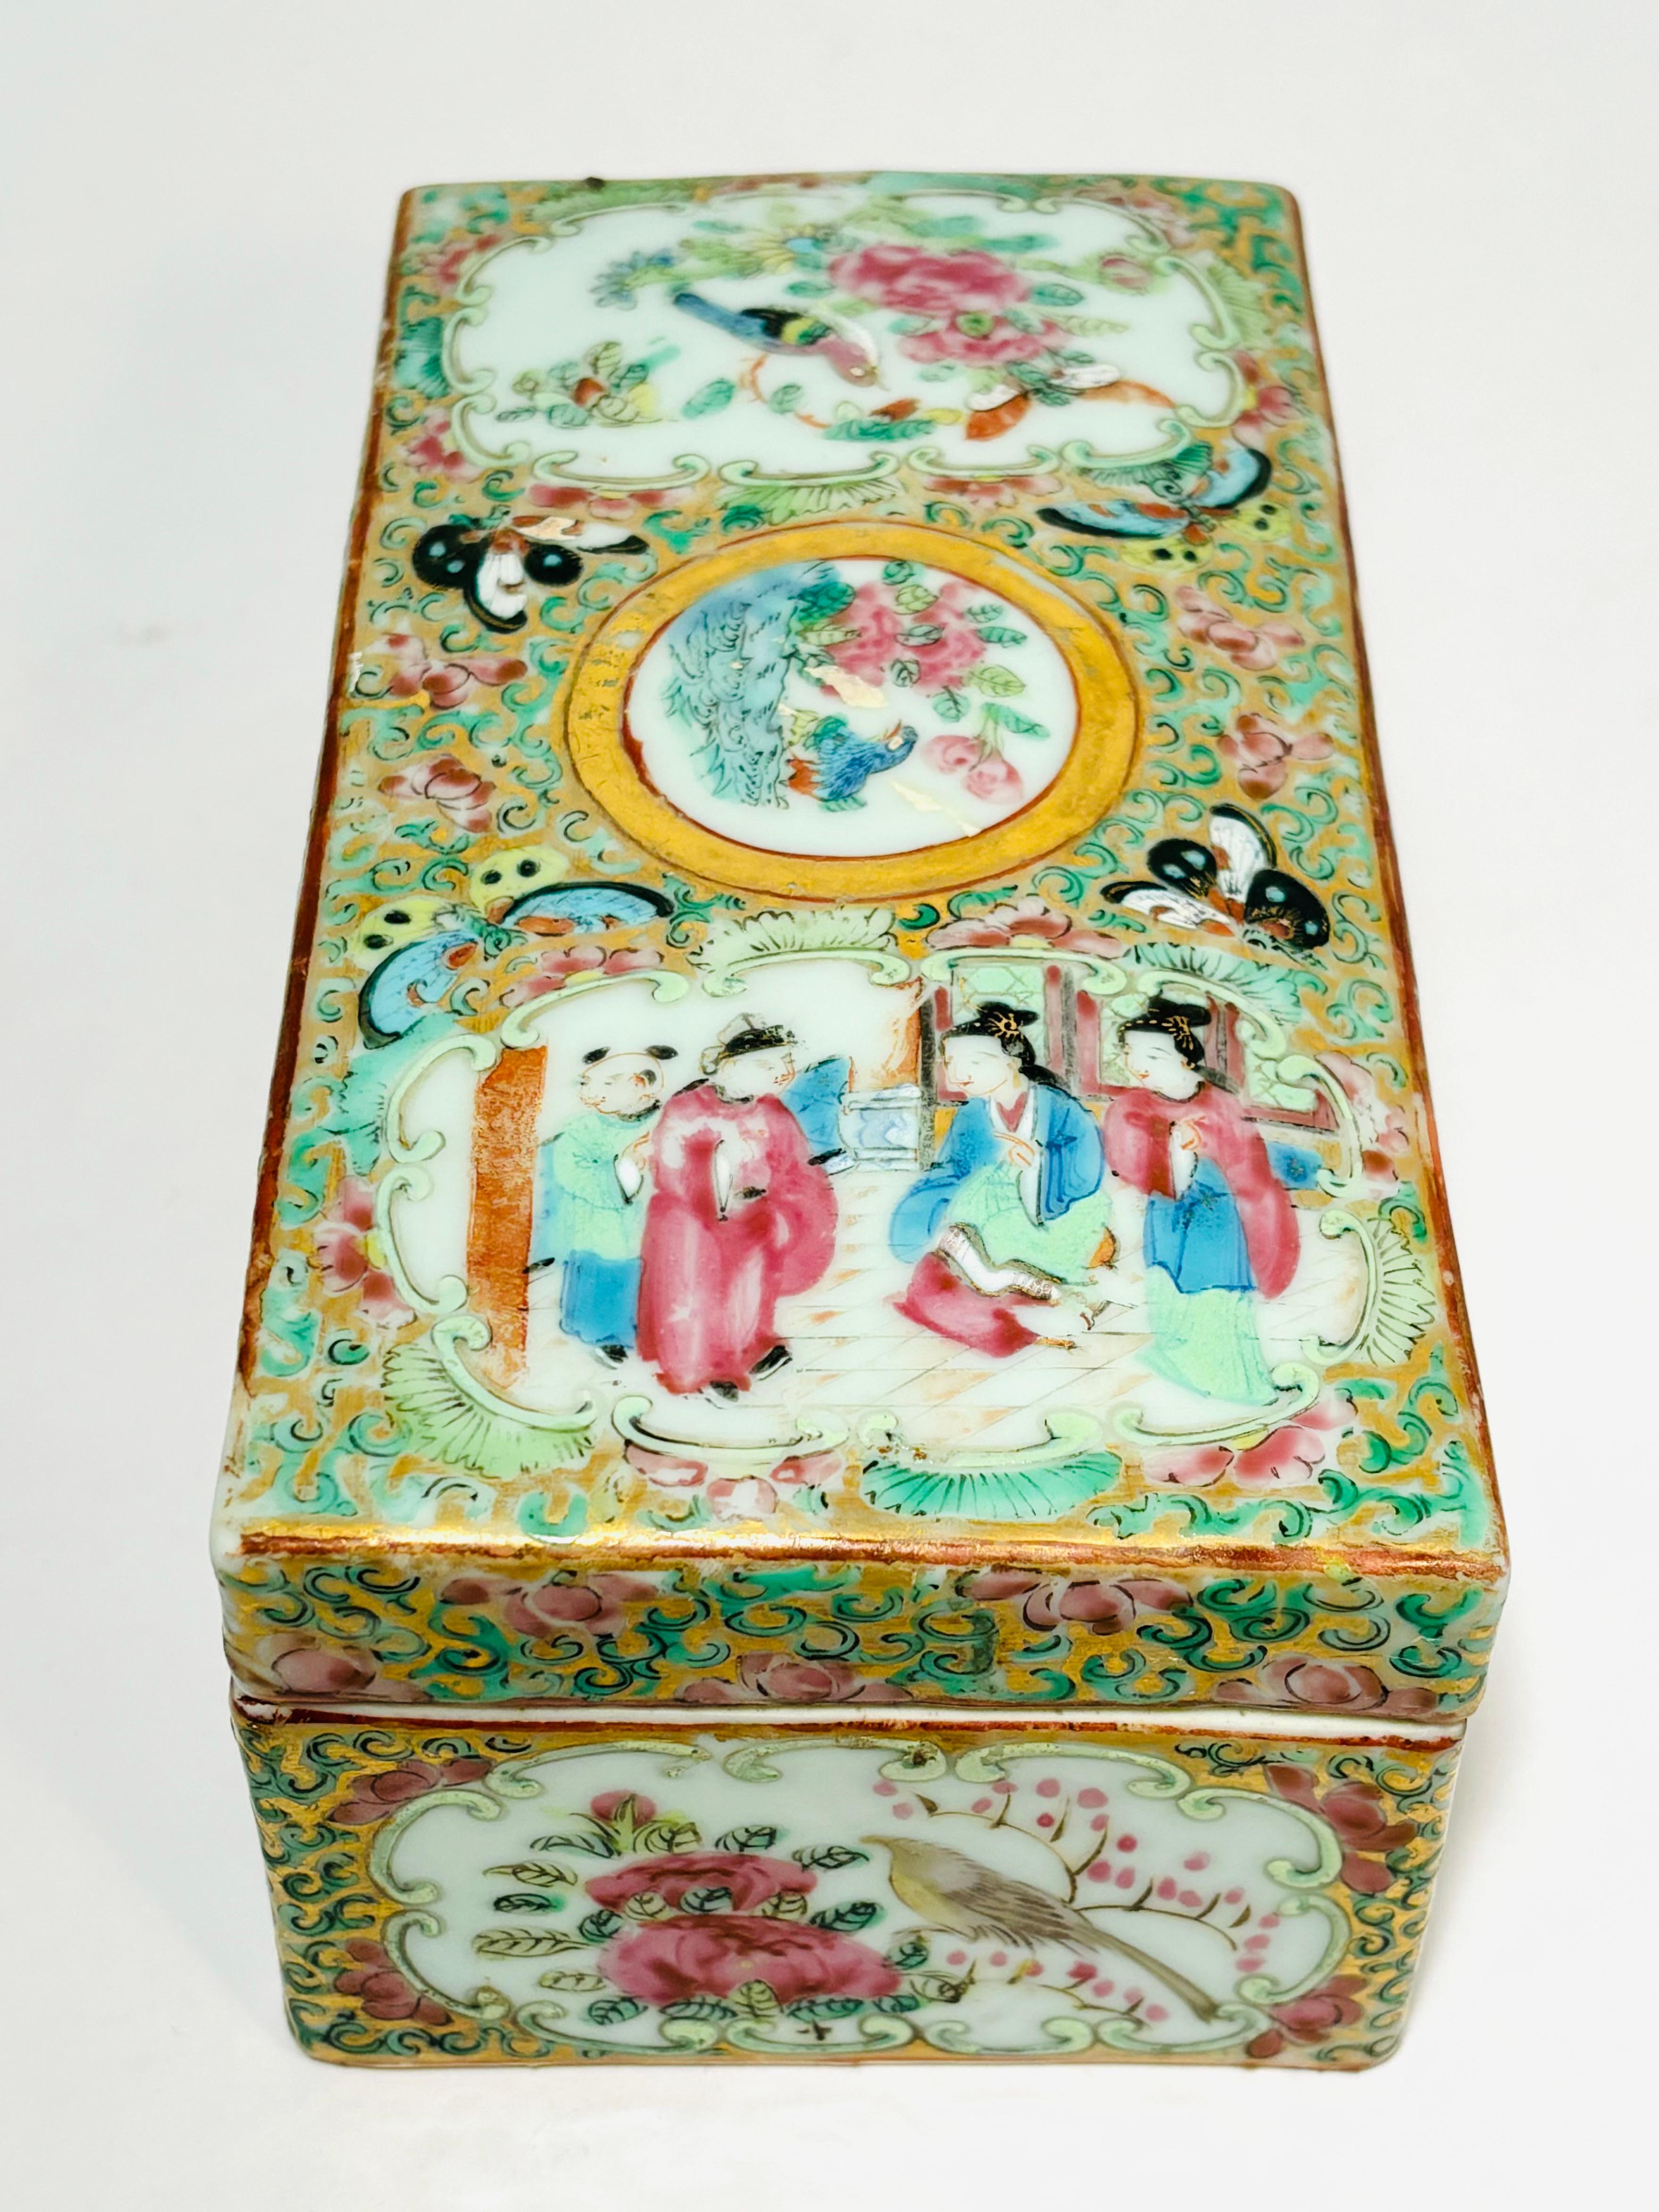 A finely made and hand enameled box with its cover, possibly for a desk or dresser top. Divided on the inside and in very good shape. Lovely cartouches of classic Chinese scenes and flora fauna. Colors remain crisp and vibrant